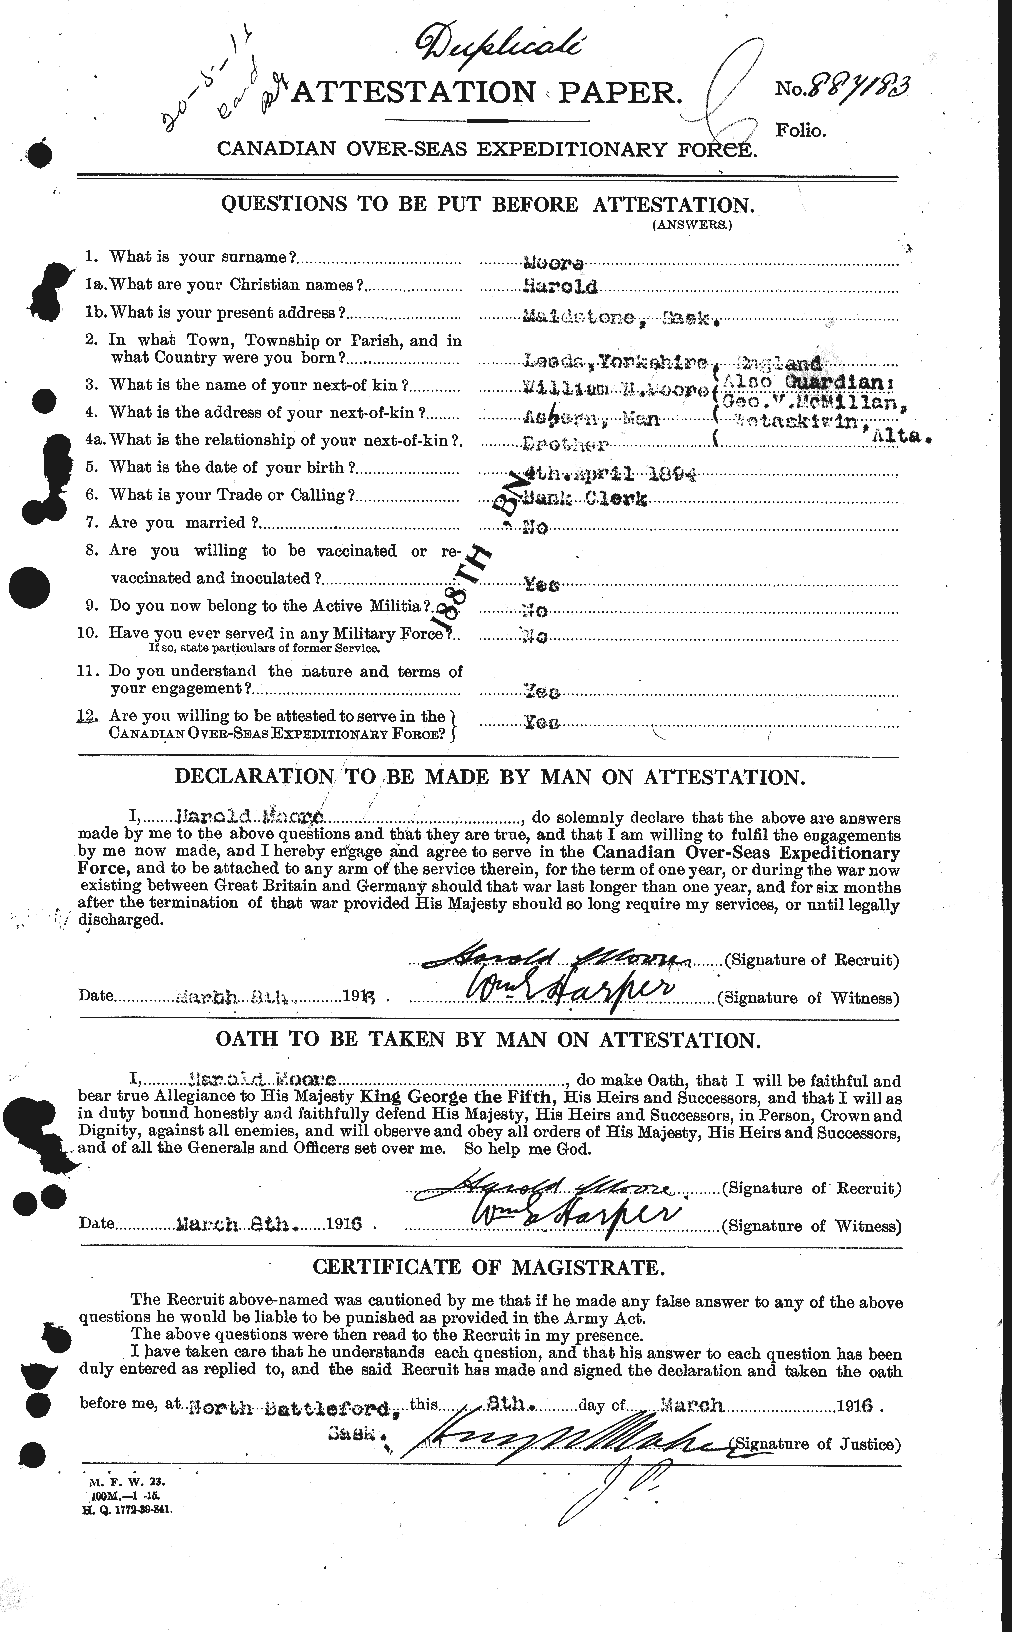 Personnel Records of the First World War - CEF 502055a